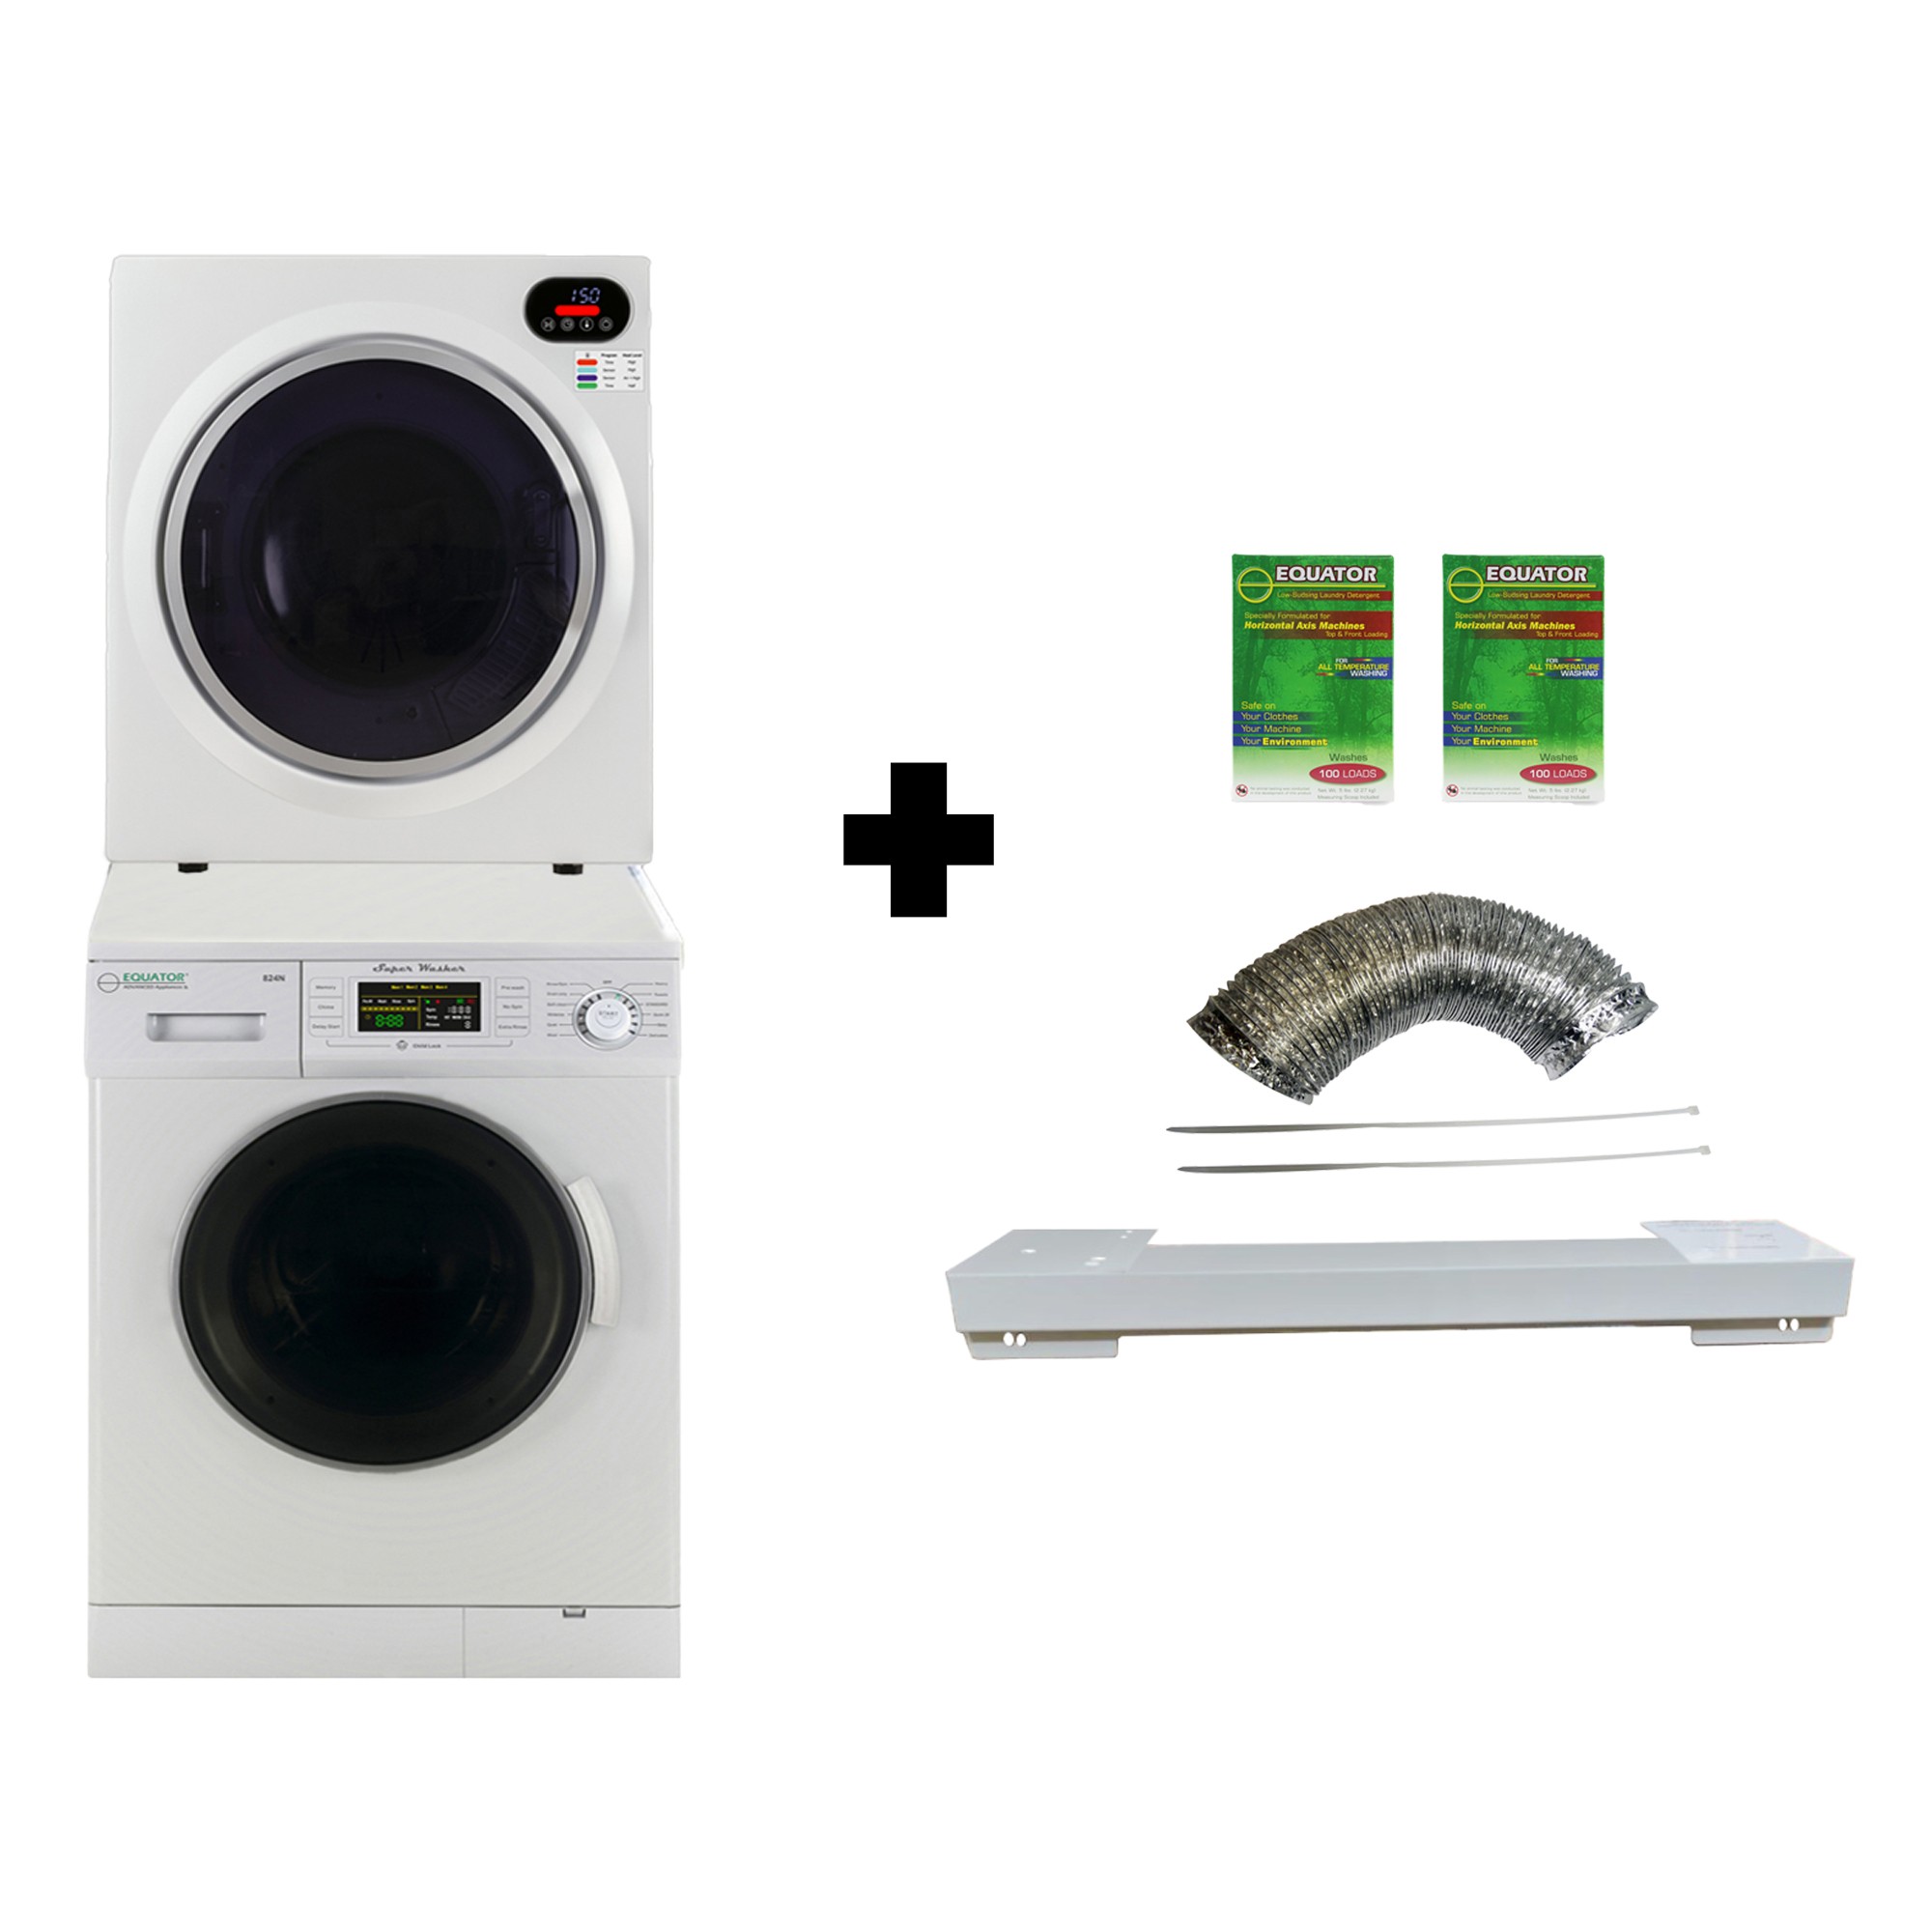 Equator 13lbs White comapct Washer 2.6 cu.ft White Compact Dryer - Stackable Set(With two Boxes of HE Detergent)				